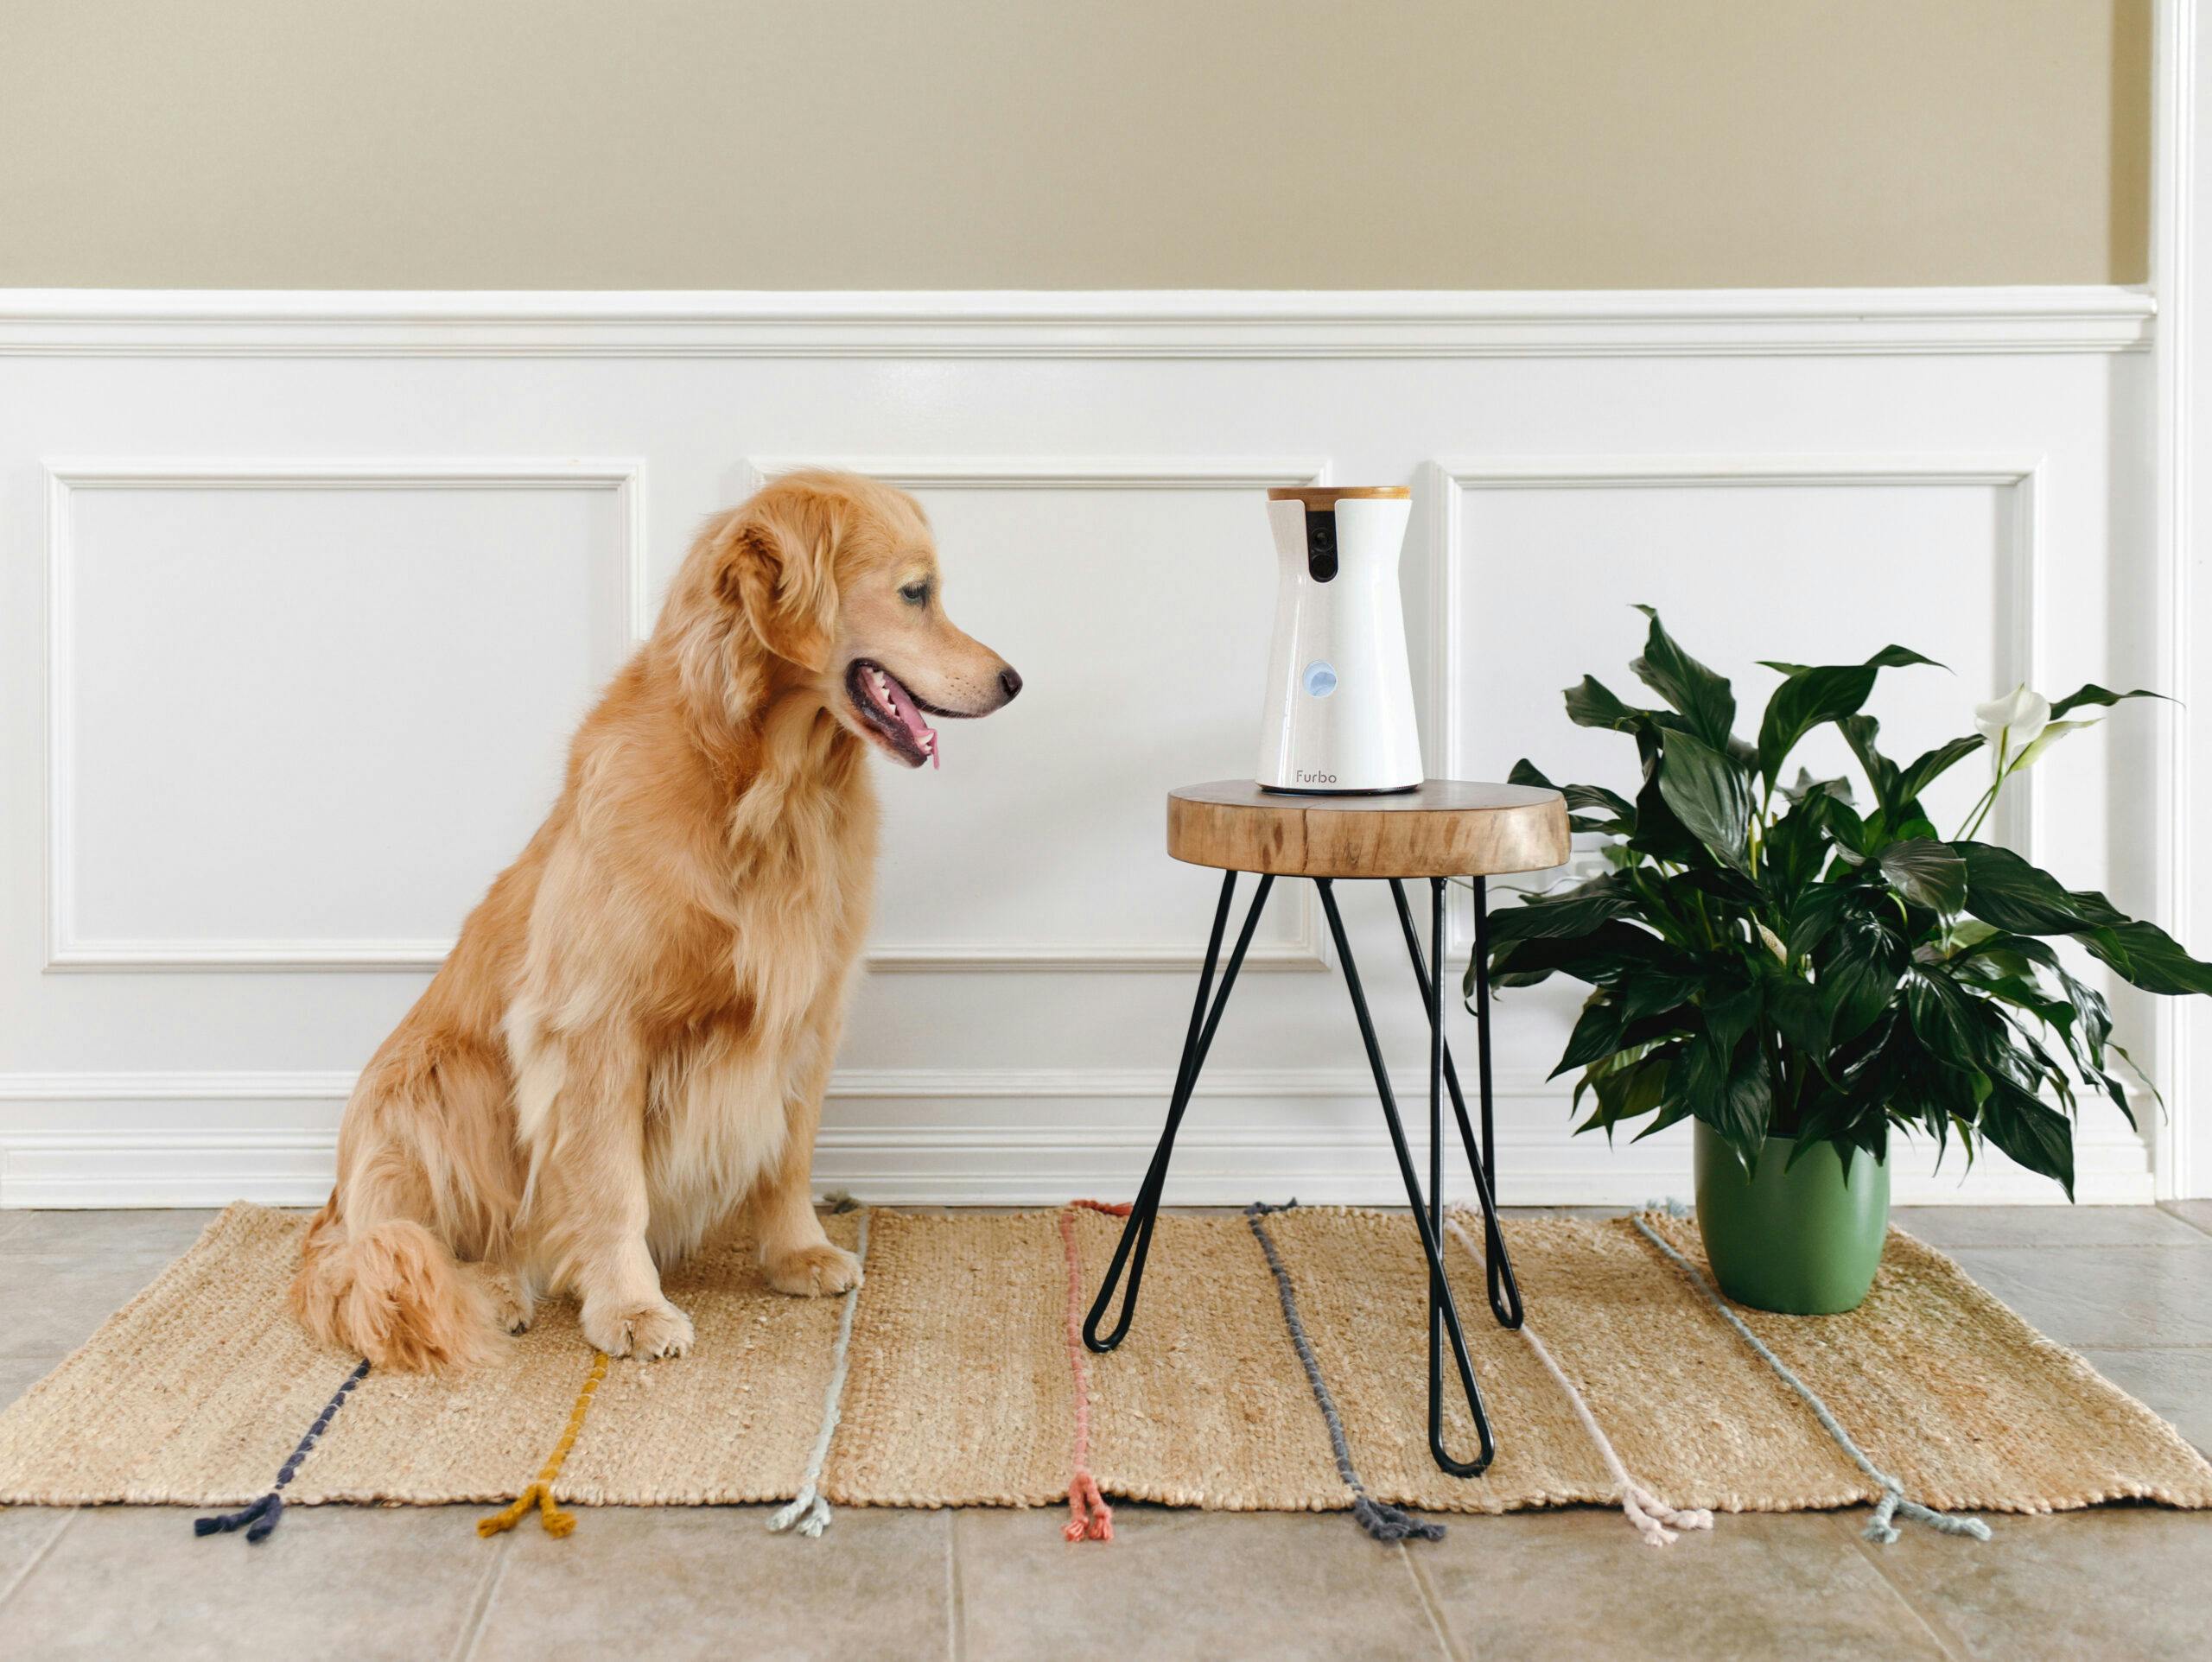 Gift your pet the gift of constant attention with Furbo’s Smart Dog Camera